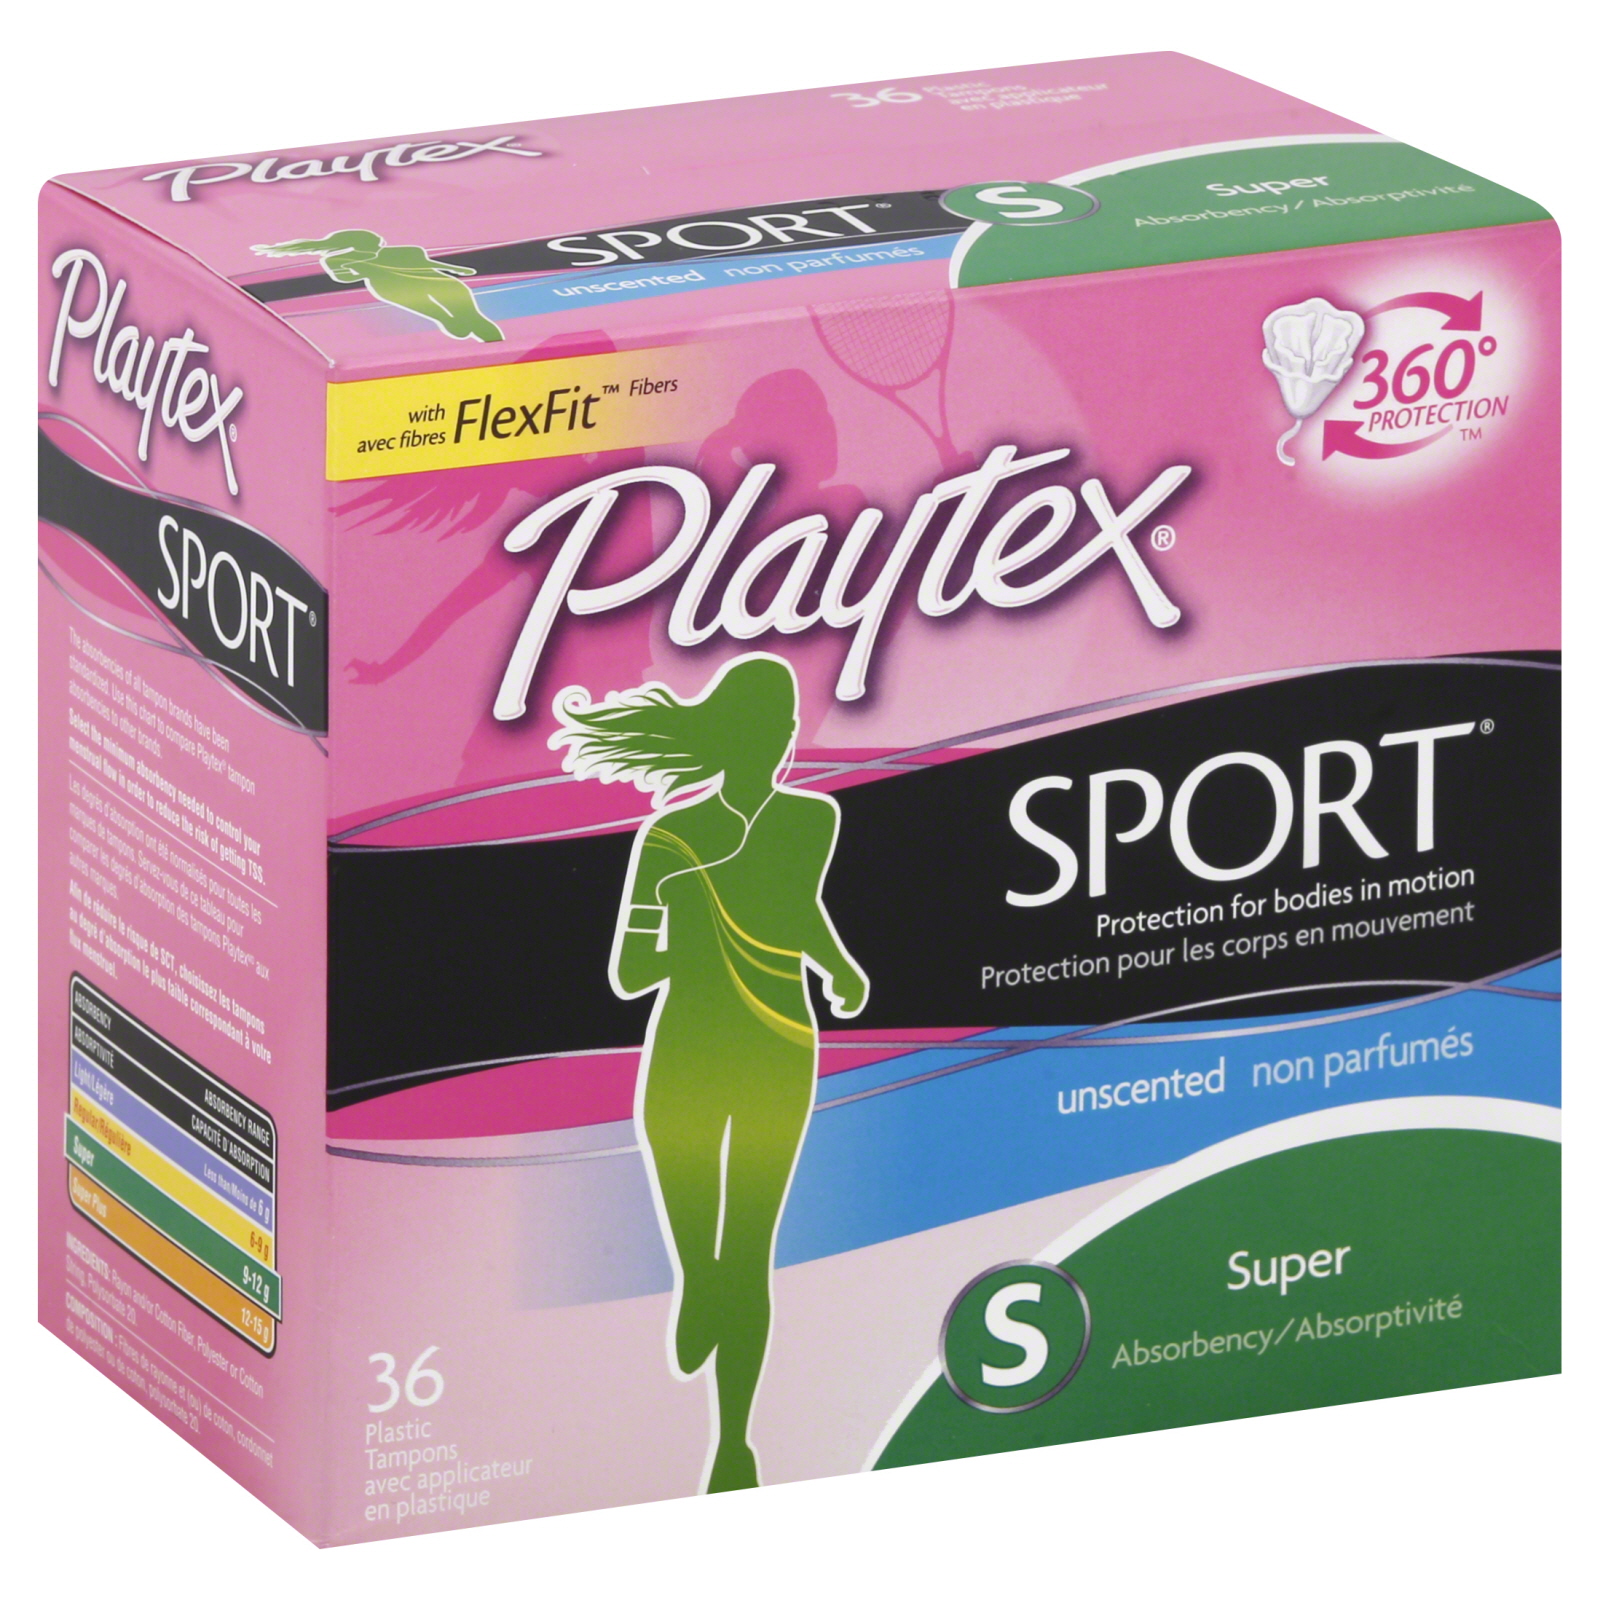 Playtex Sport Tampons, Plastic, Super Absorbency, Unscented, 36 tampons